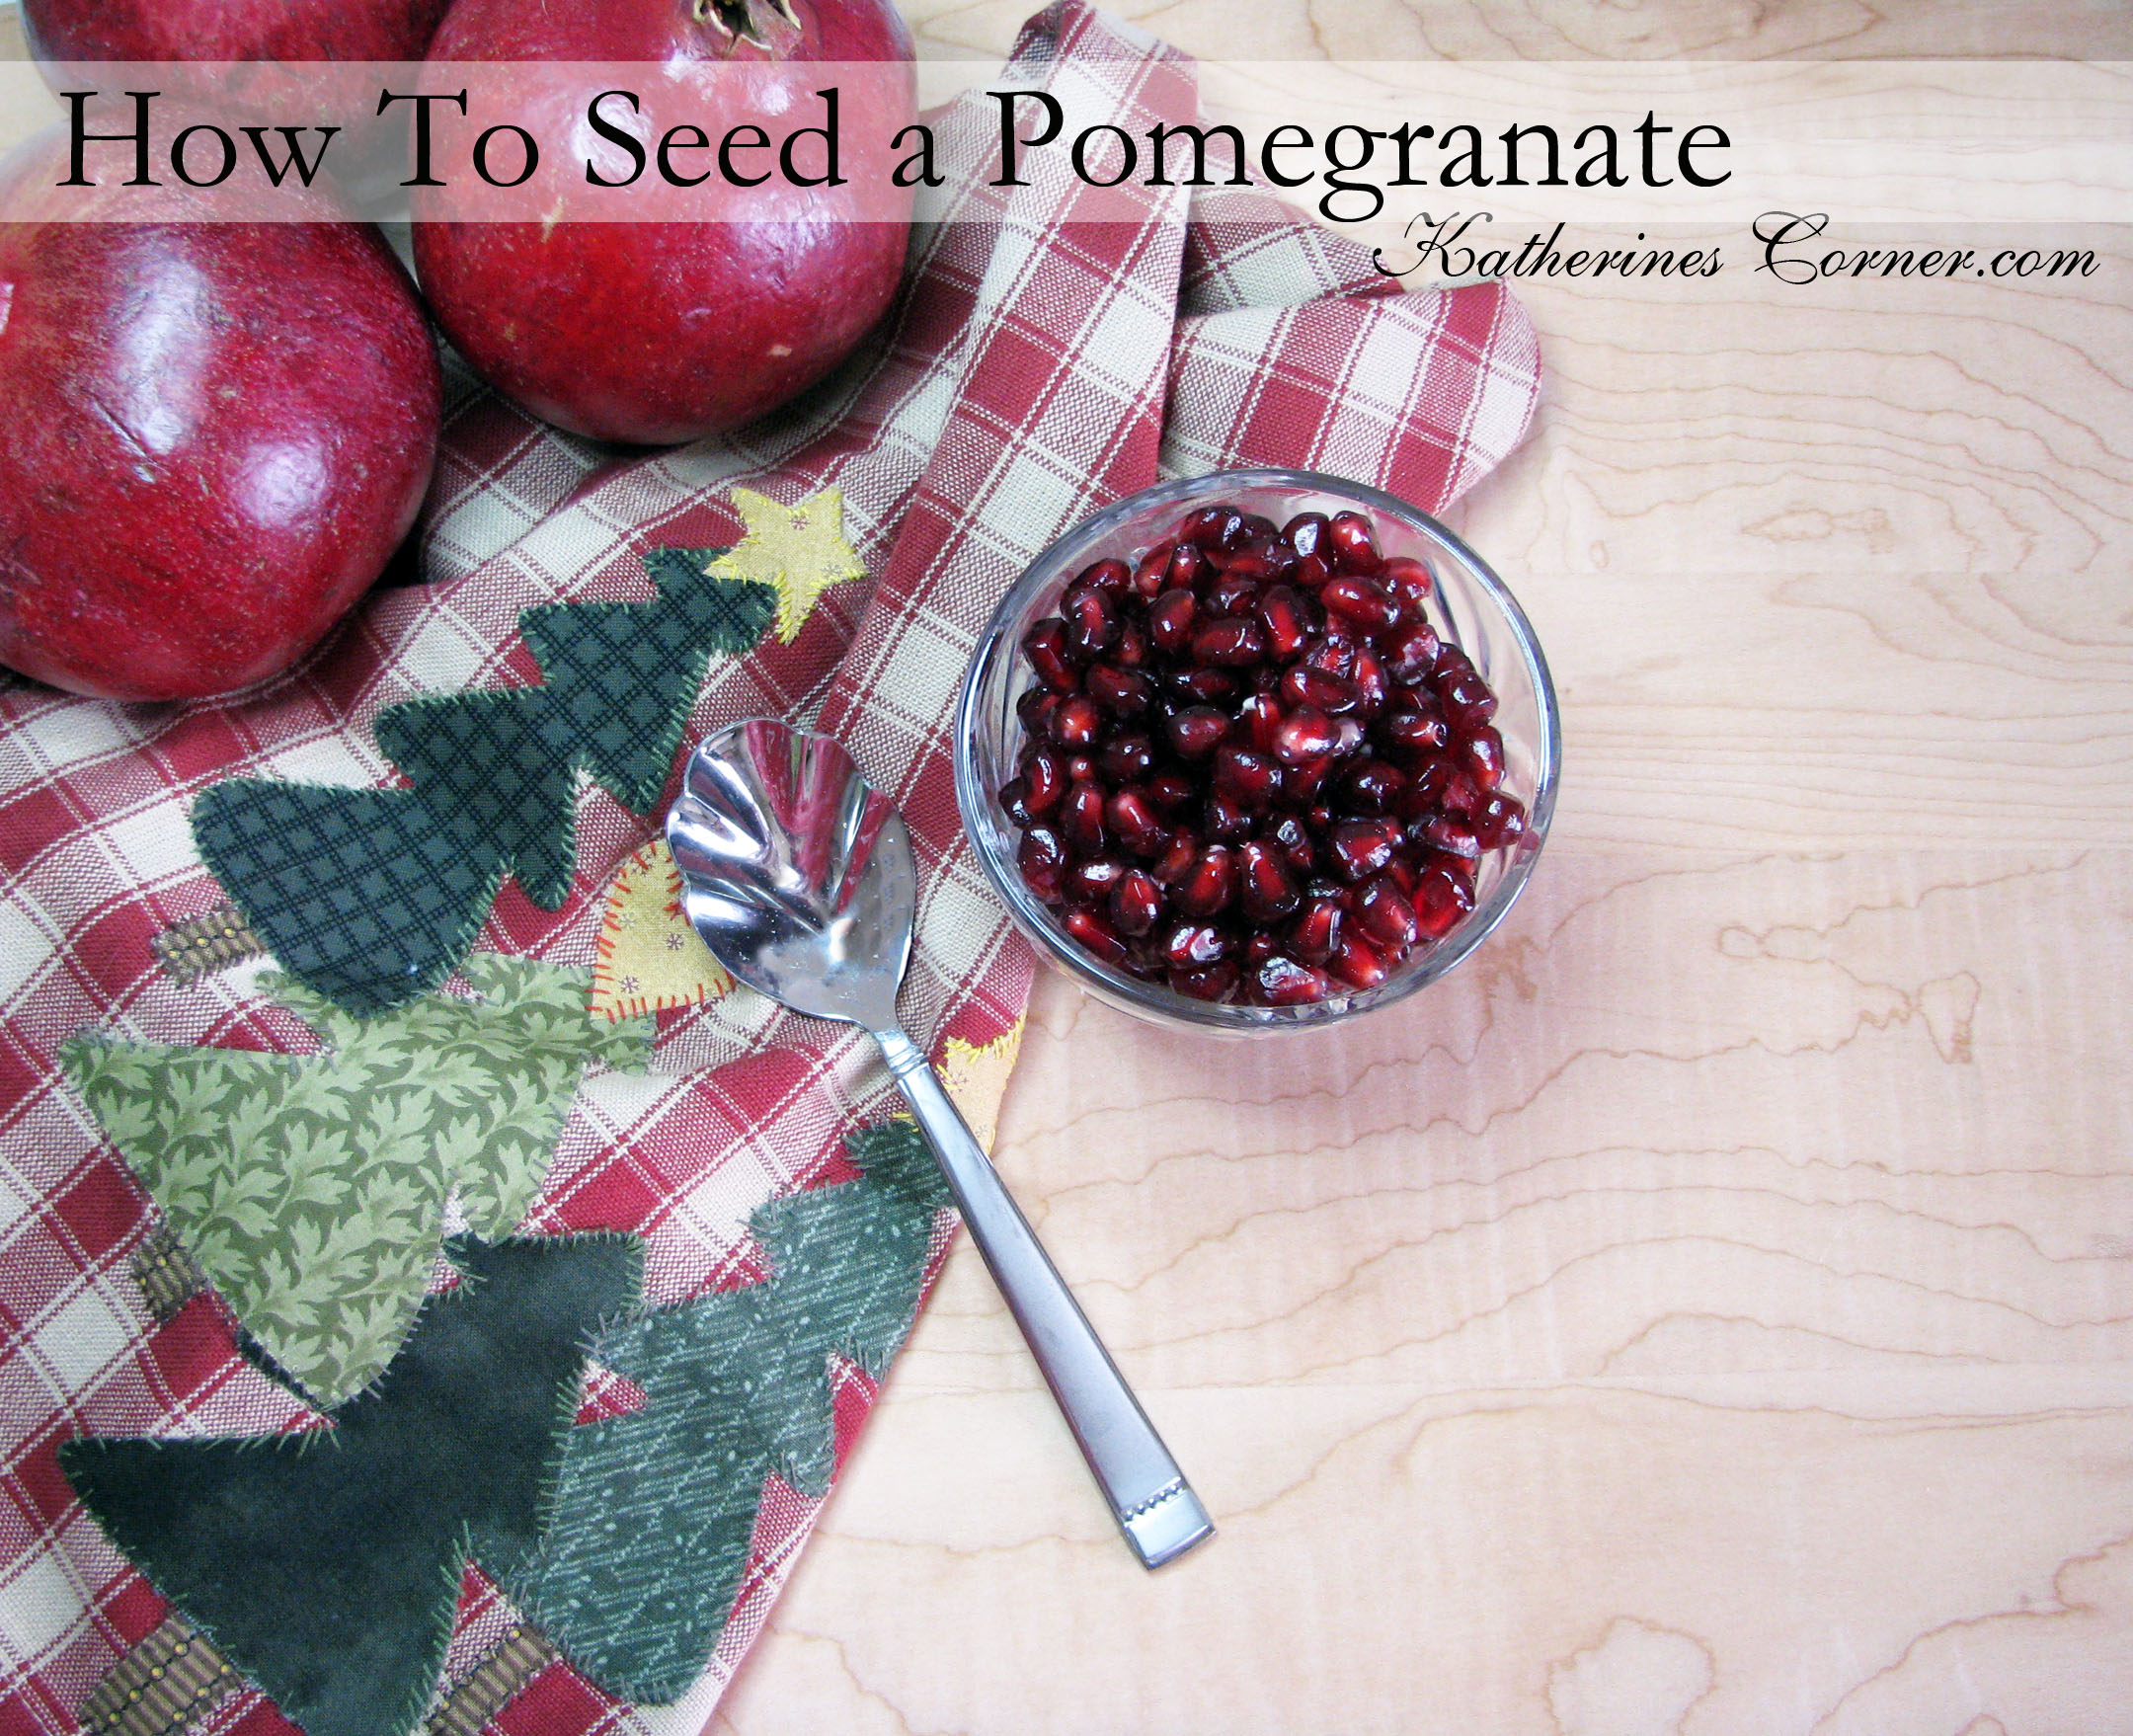 Blog Post 1000 How To Seed A Pomegranate